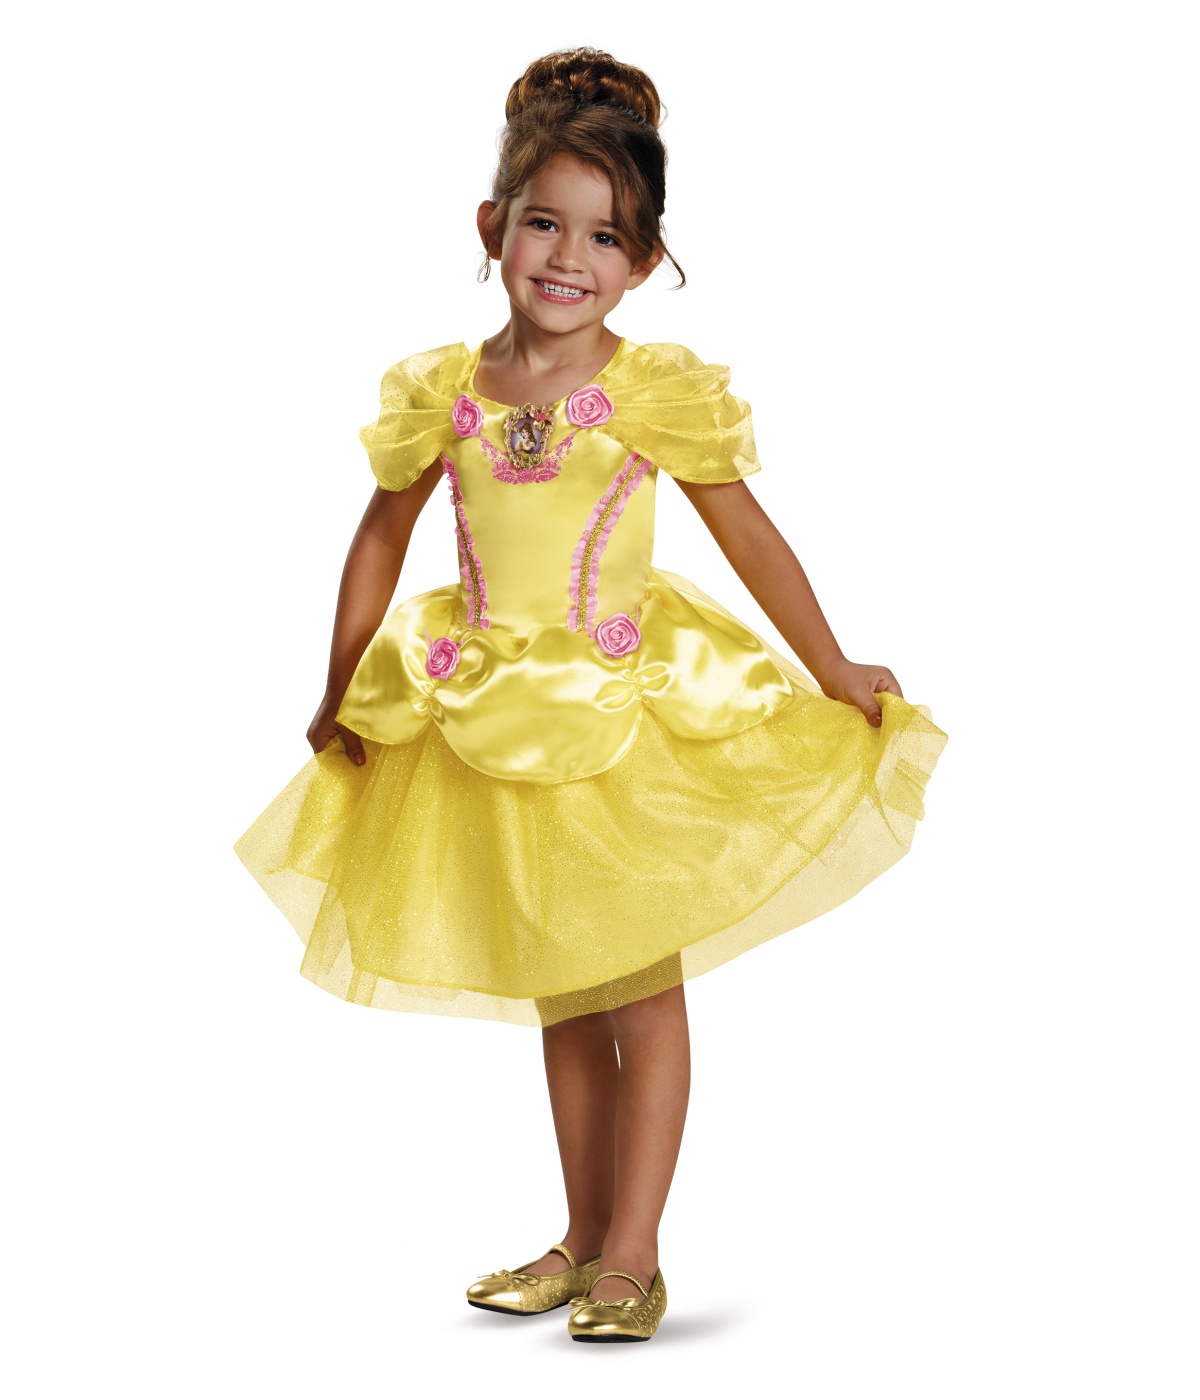 Disney Beauty And The Beast Princess Belle Little Girls Costume Gown